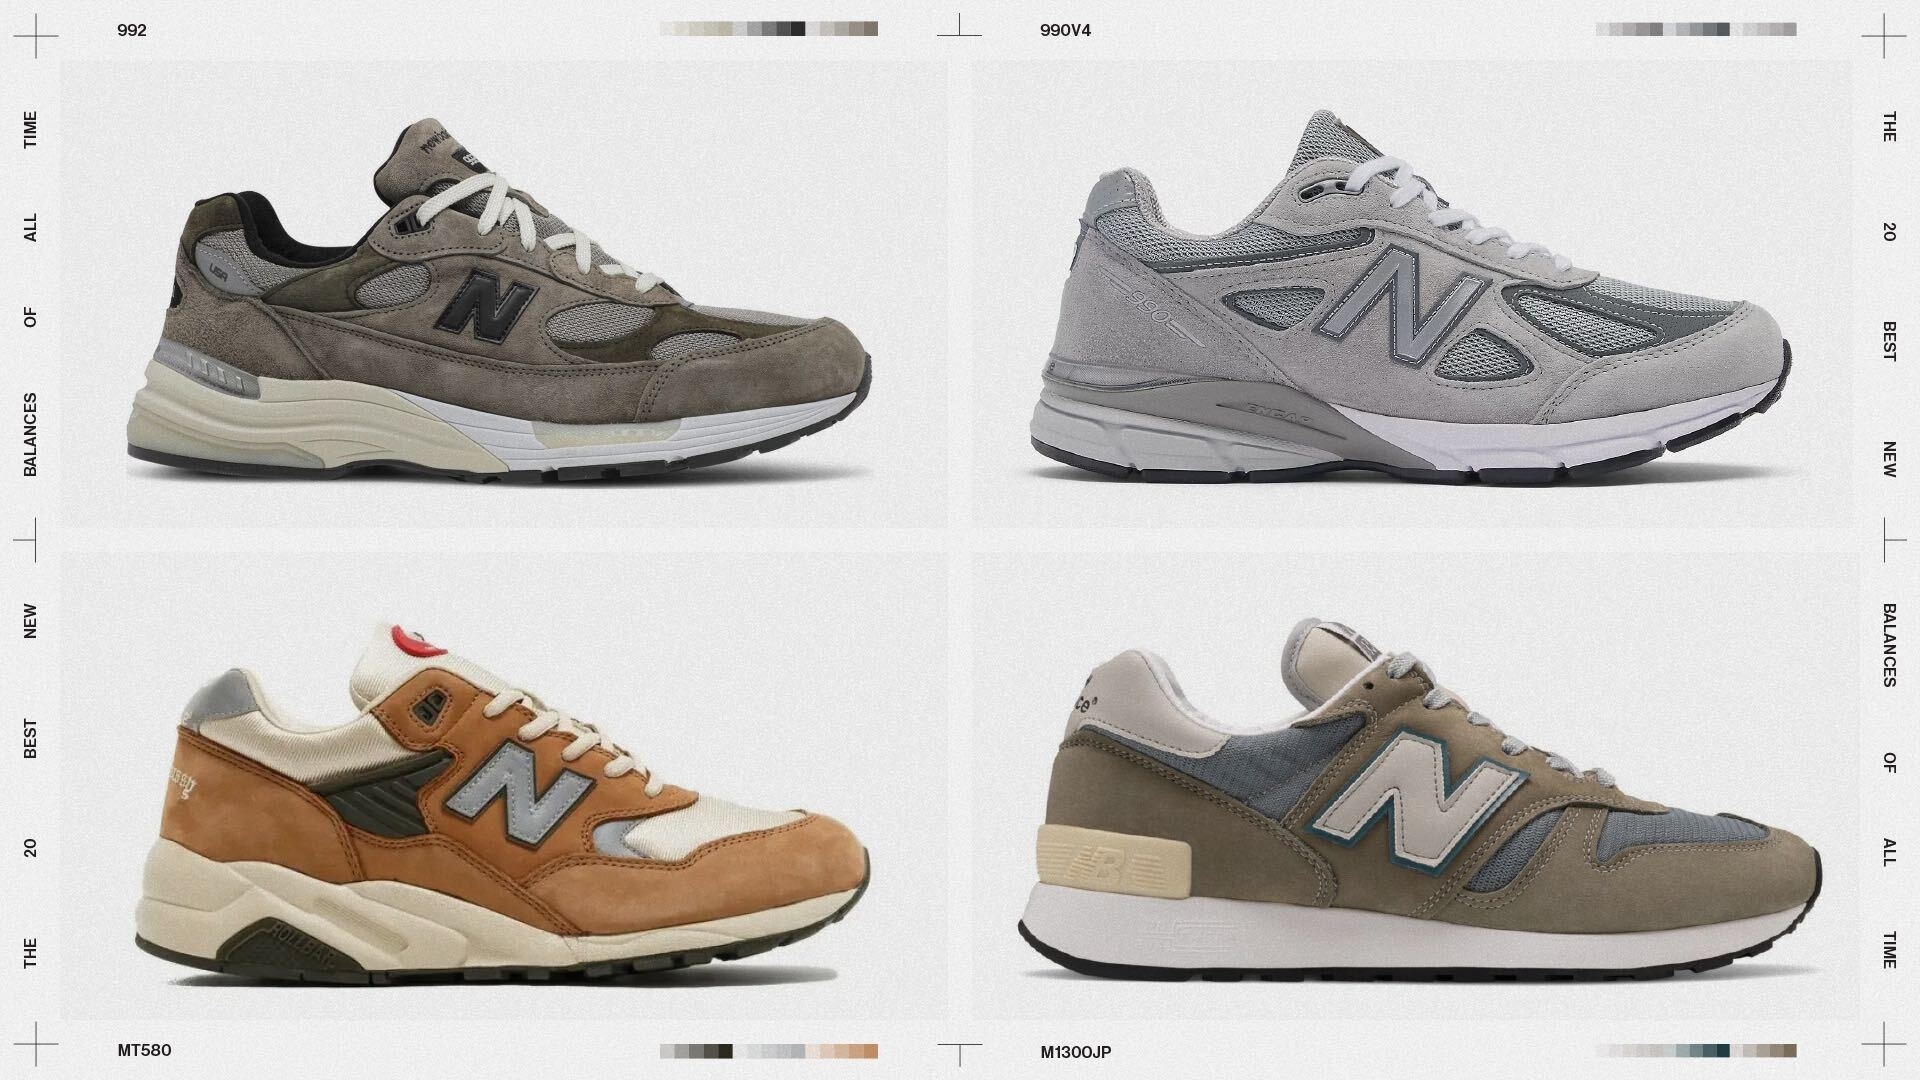 New Balance 550s Are an Essential in Any Sneaker Collection